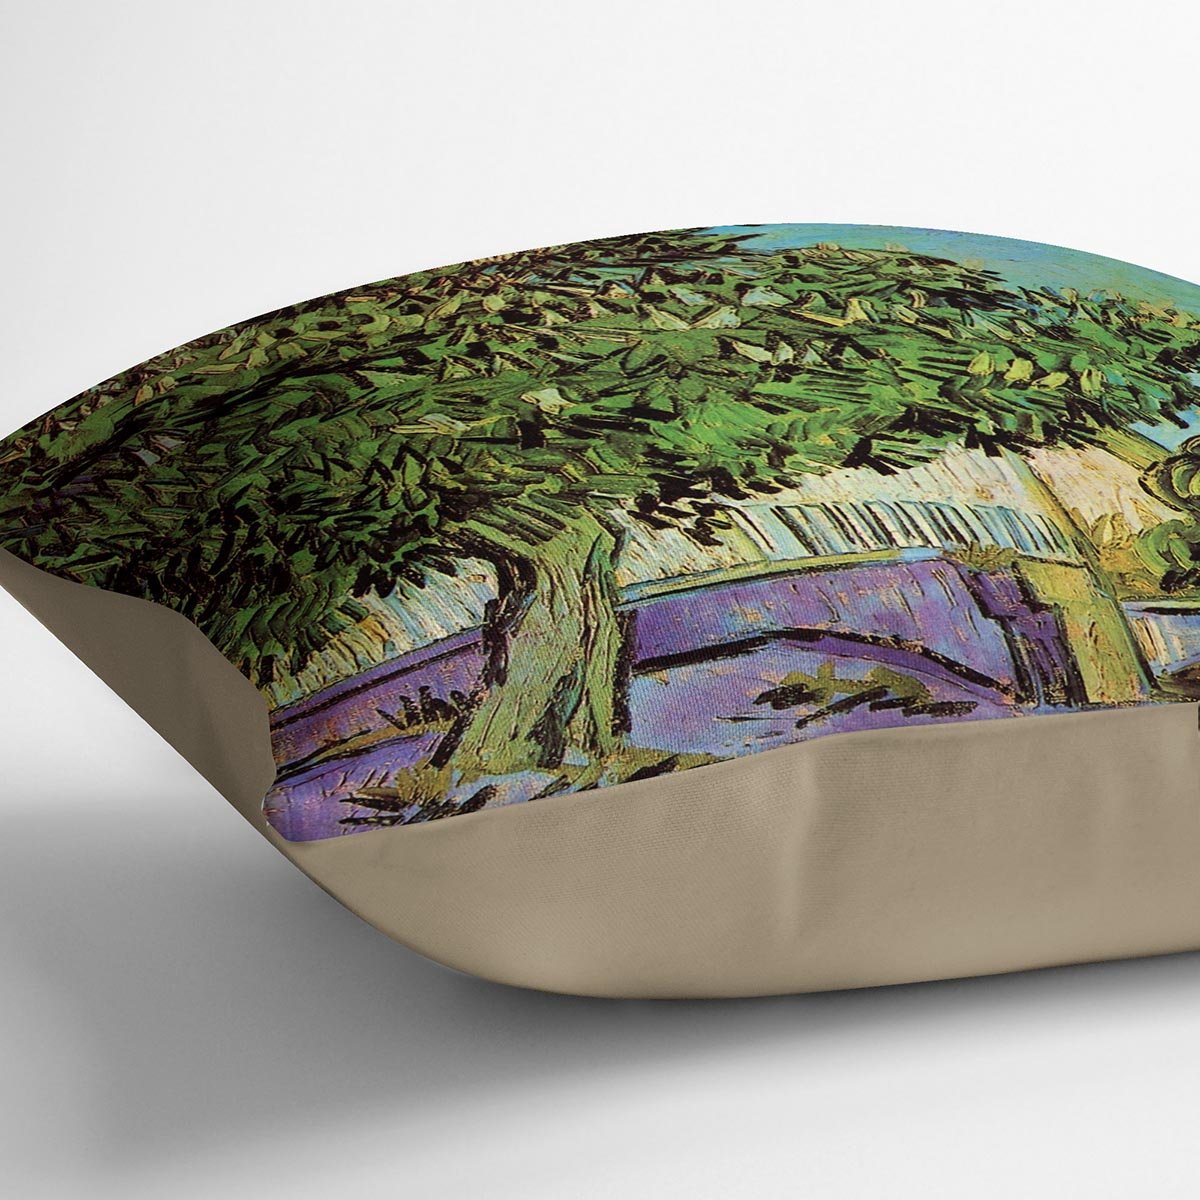 Chestnut Tree in Blossom by Van Gogh Throw Pillow